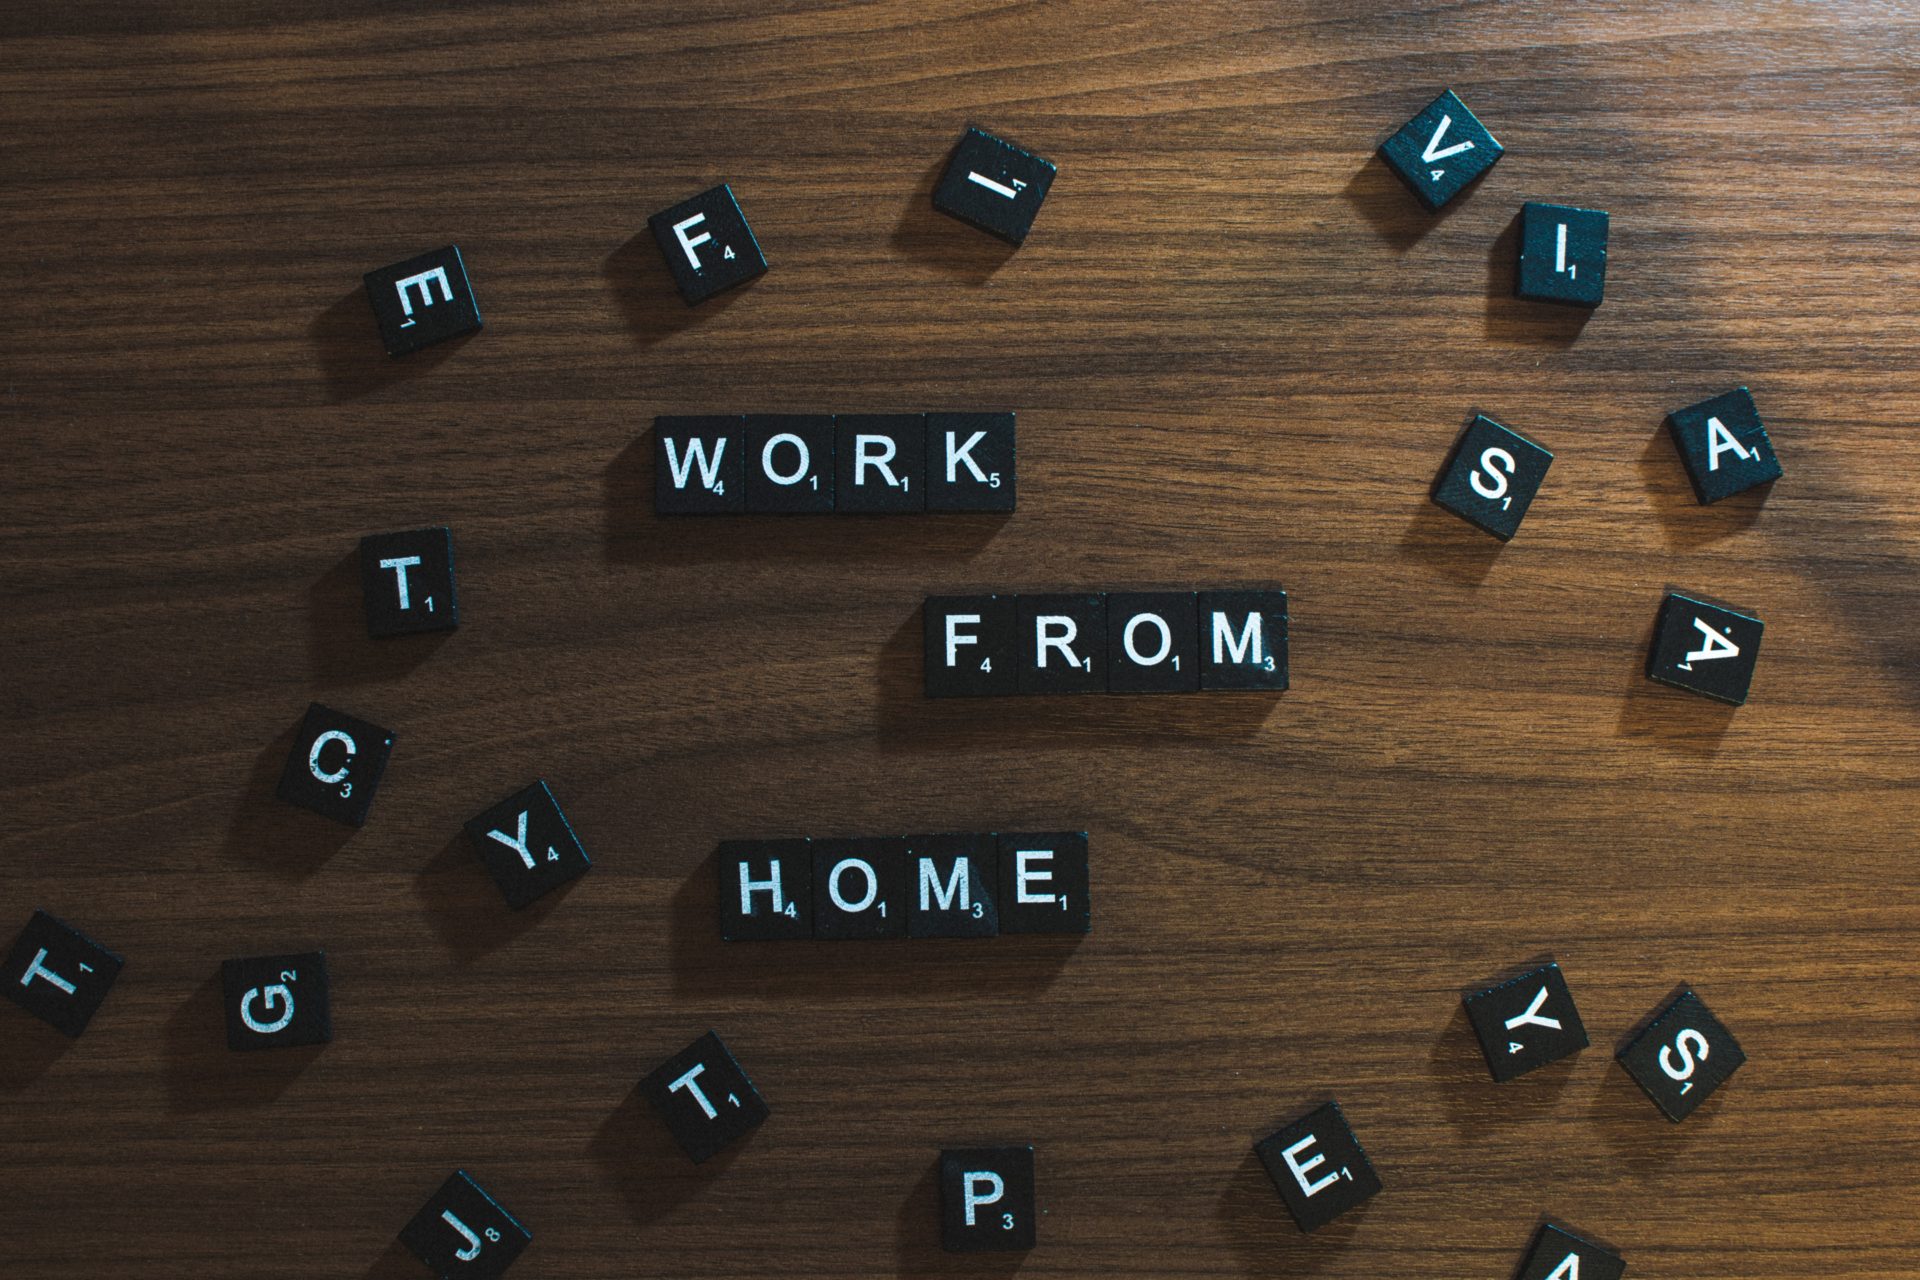 A Guide To Working From Home Safely